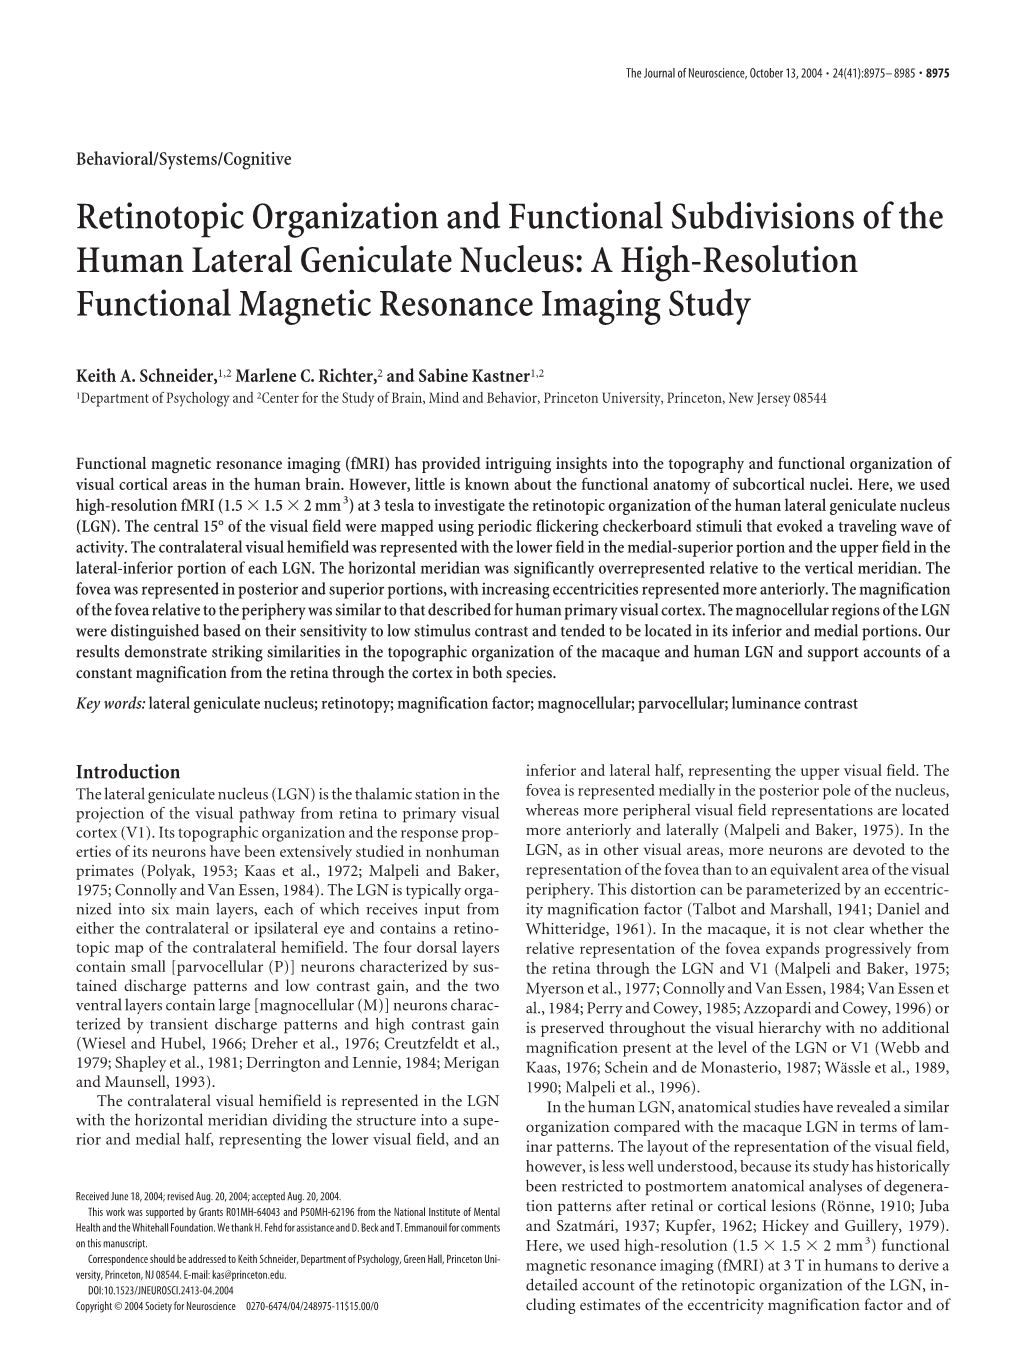 Retinotopic Organization and Functional Subdivisions of the Human Lateral Geniculate Nucleus: a High-Resolution Functional Magnetic Resonance Imaging Study